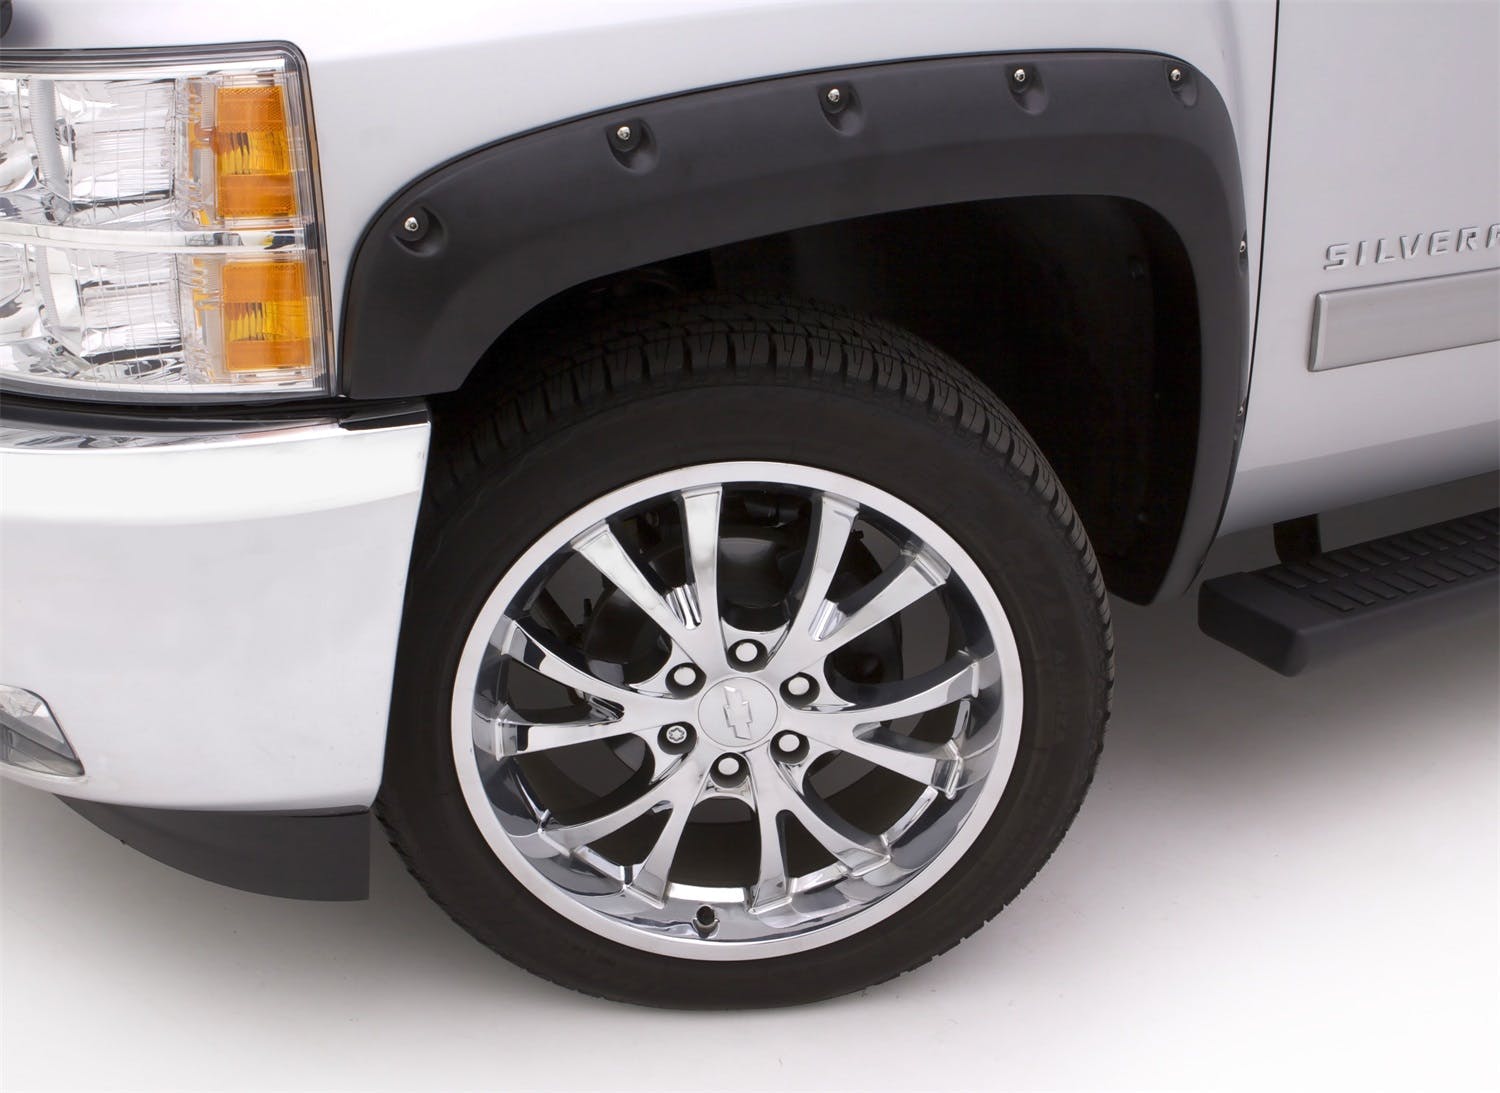 LUND RX108S RX-Style Fender Flares 4pc Smooth RX-RIVET STYLE 4PC SMOOTH